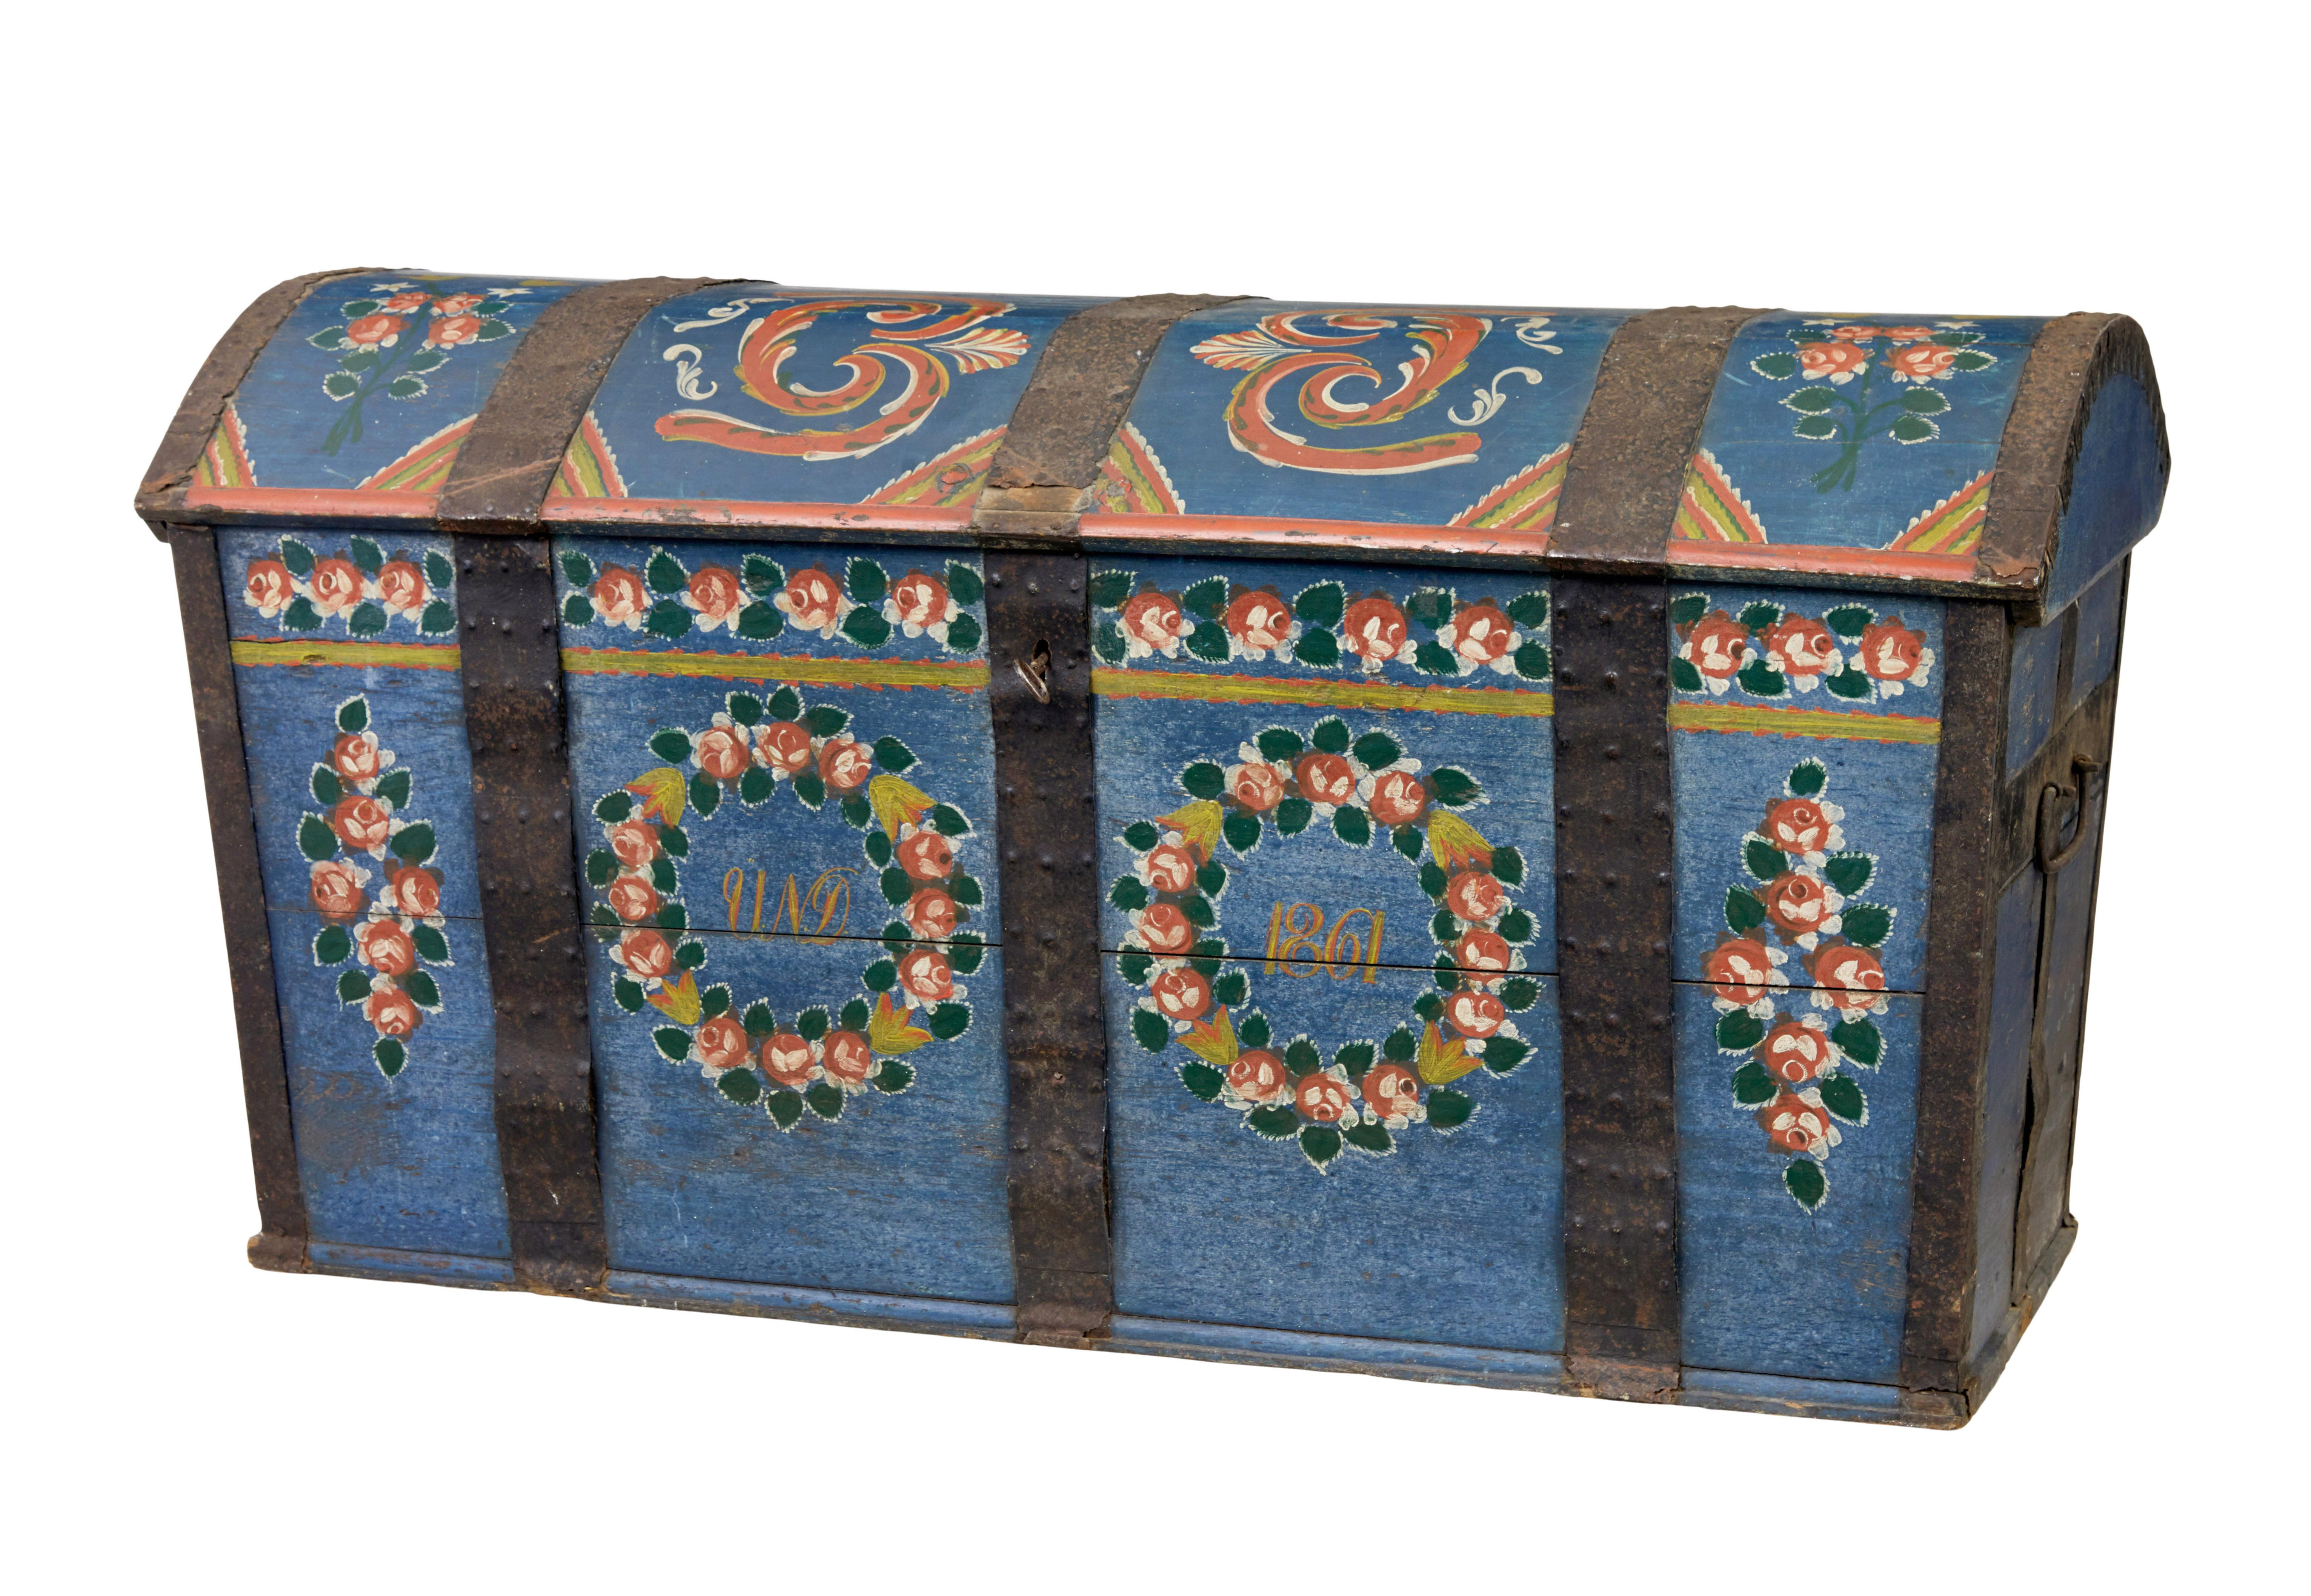 Traditional 19th century painted Swedish dome trunk circa 1861.

Hand painted and dated 1861, but chest is older as they are often given away as marriage gifts.

Made from oak rather than the usual pine.  Dome top with original metal strap work